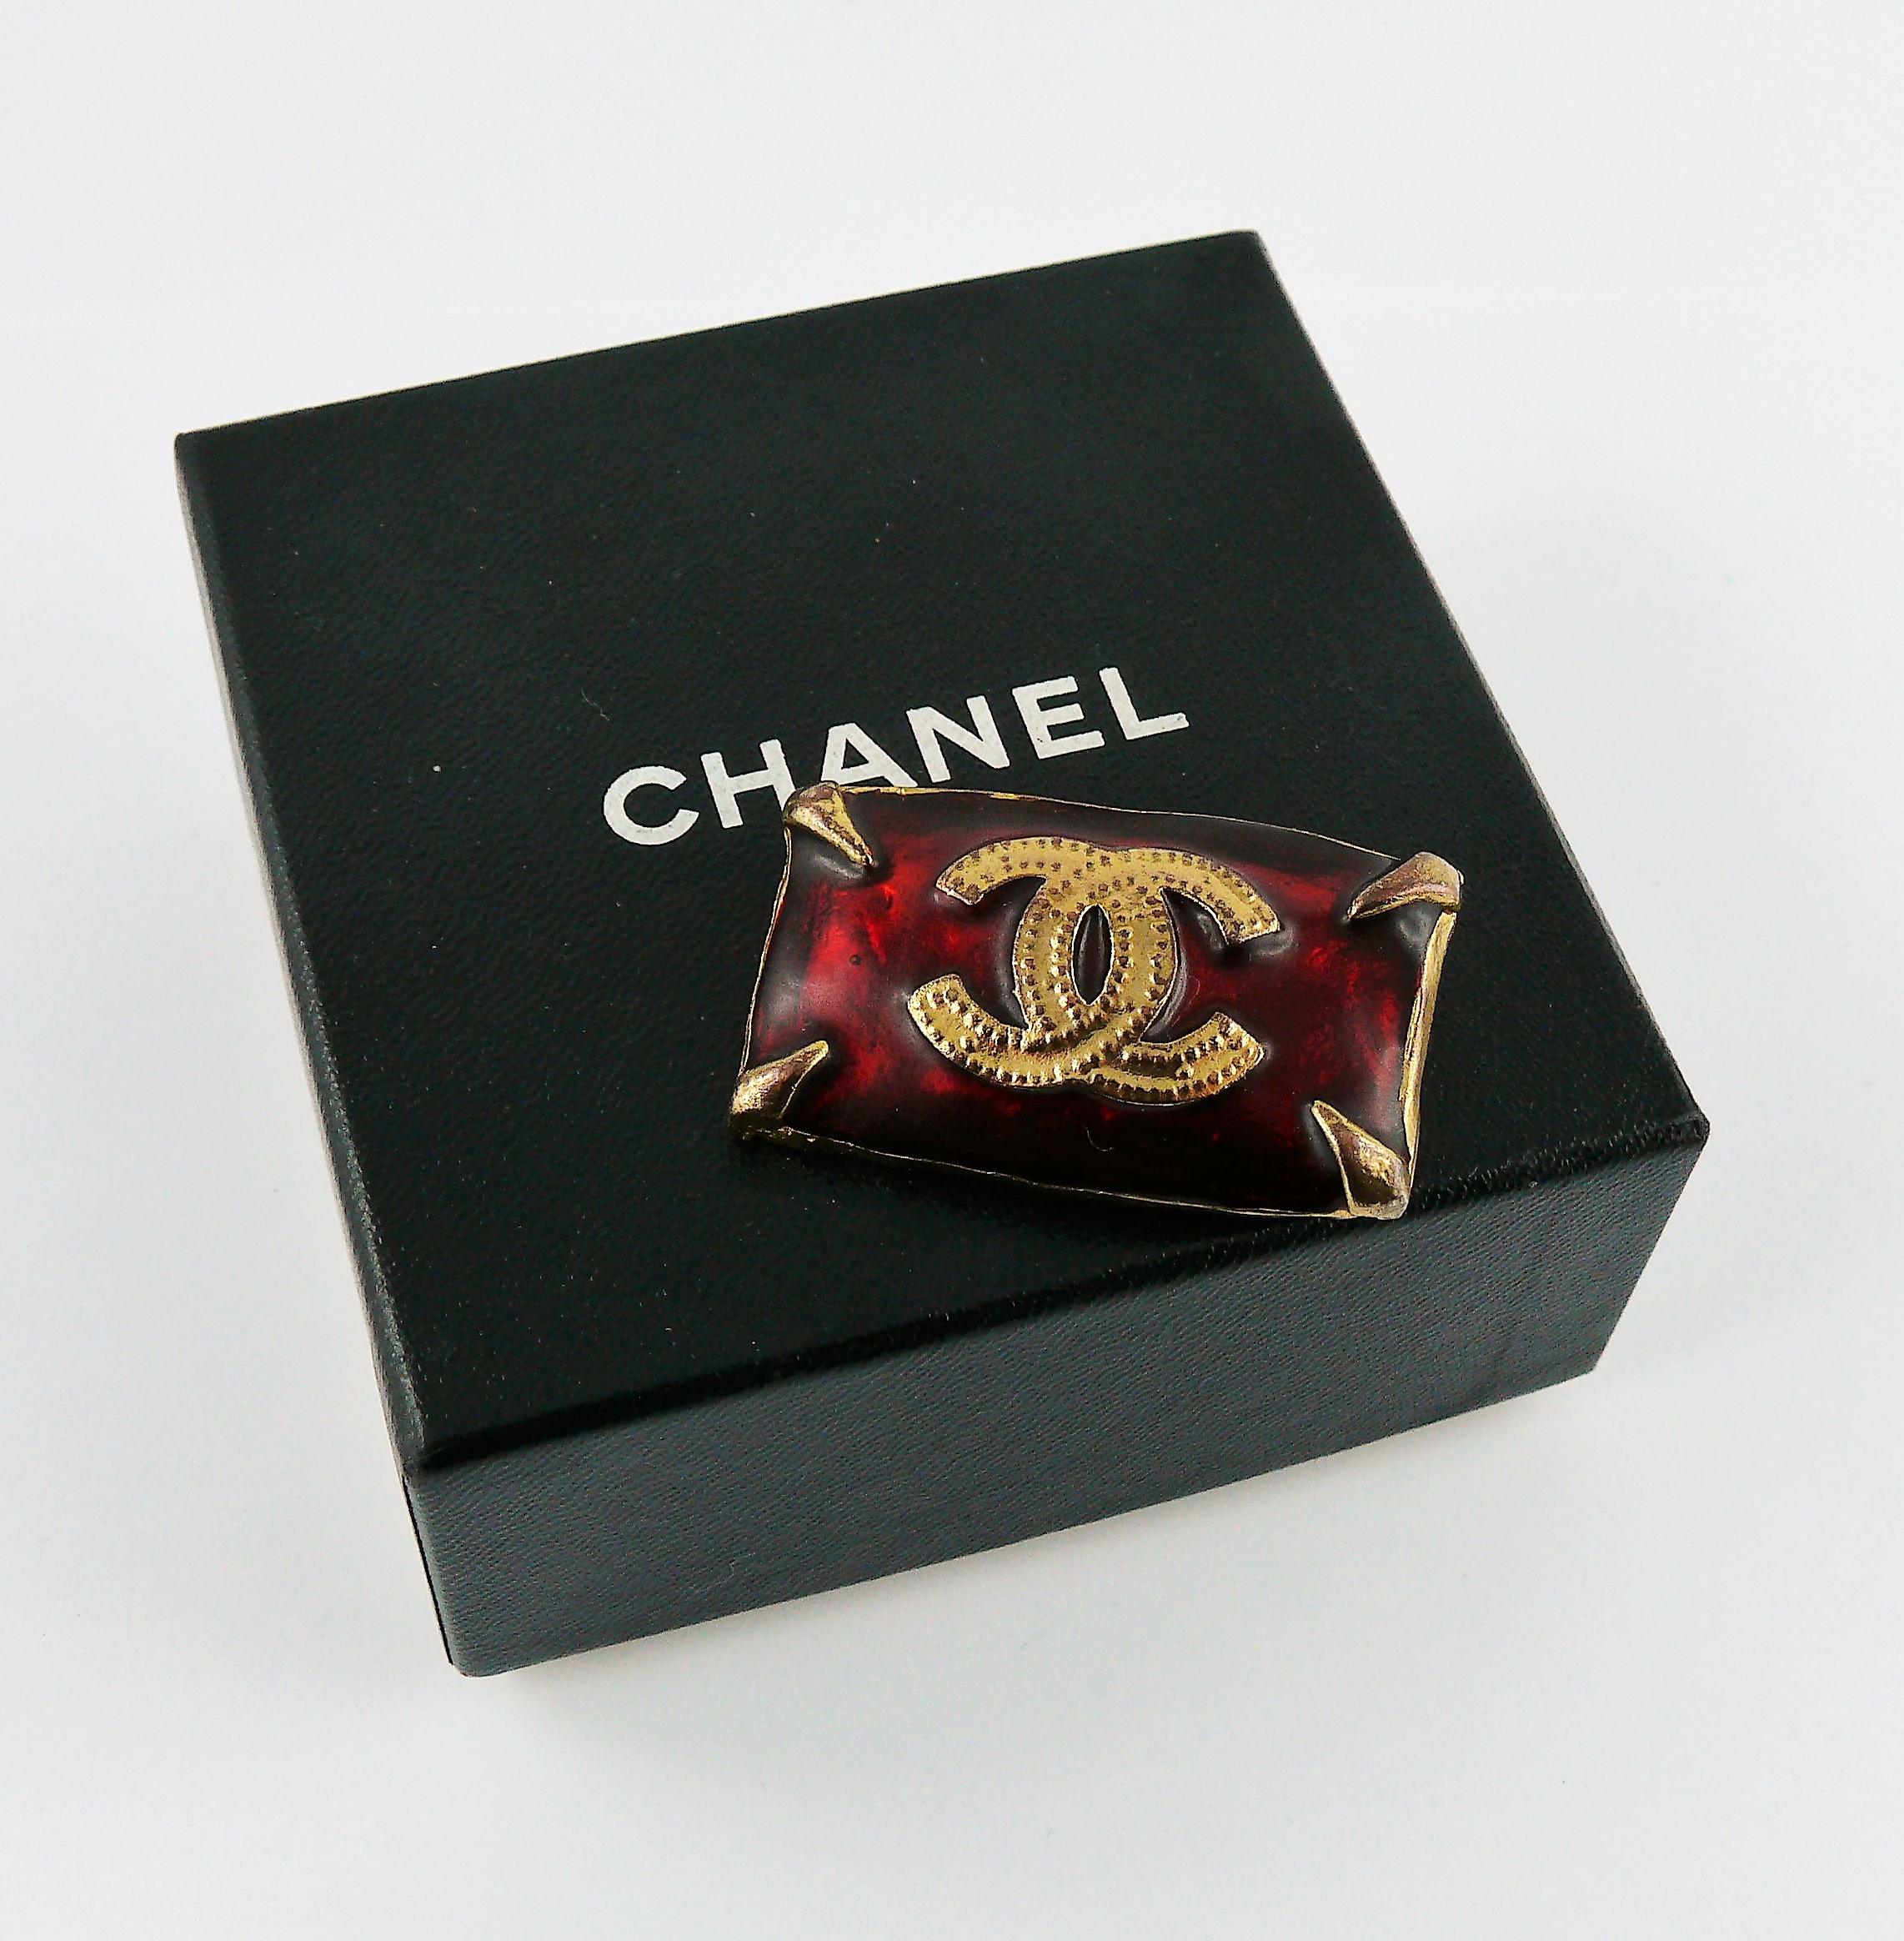 CHANEL vintage gold toned rectangular brooch featuring a large CC logo on a red enamel background.

Embossed CHANEL Made in France.

Indicative measurements : length approx. 3.9 cm (1.54 inches) / width approx. 2.3 cm (0.91 inch).

Comes with a